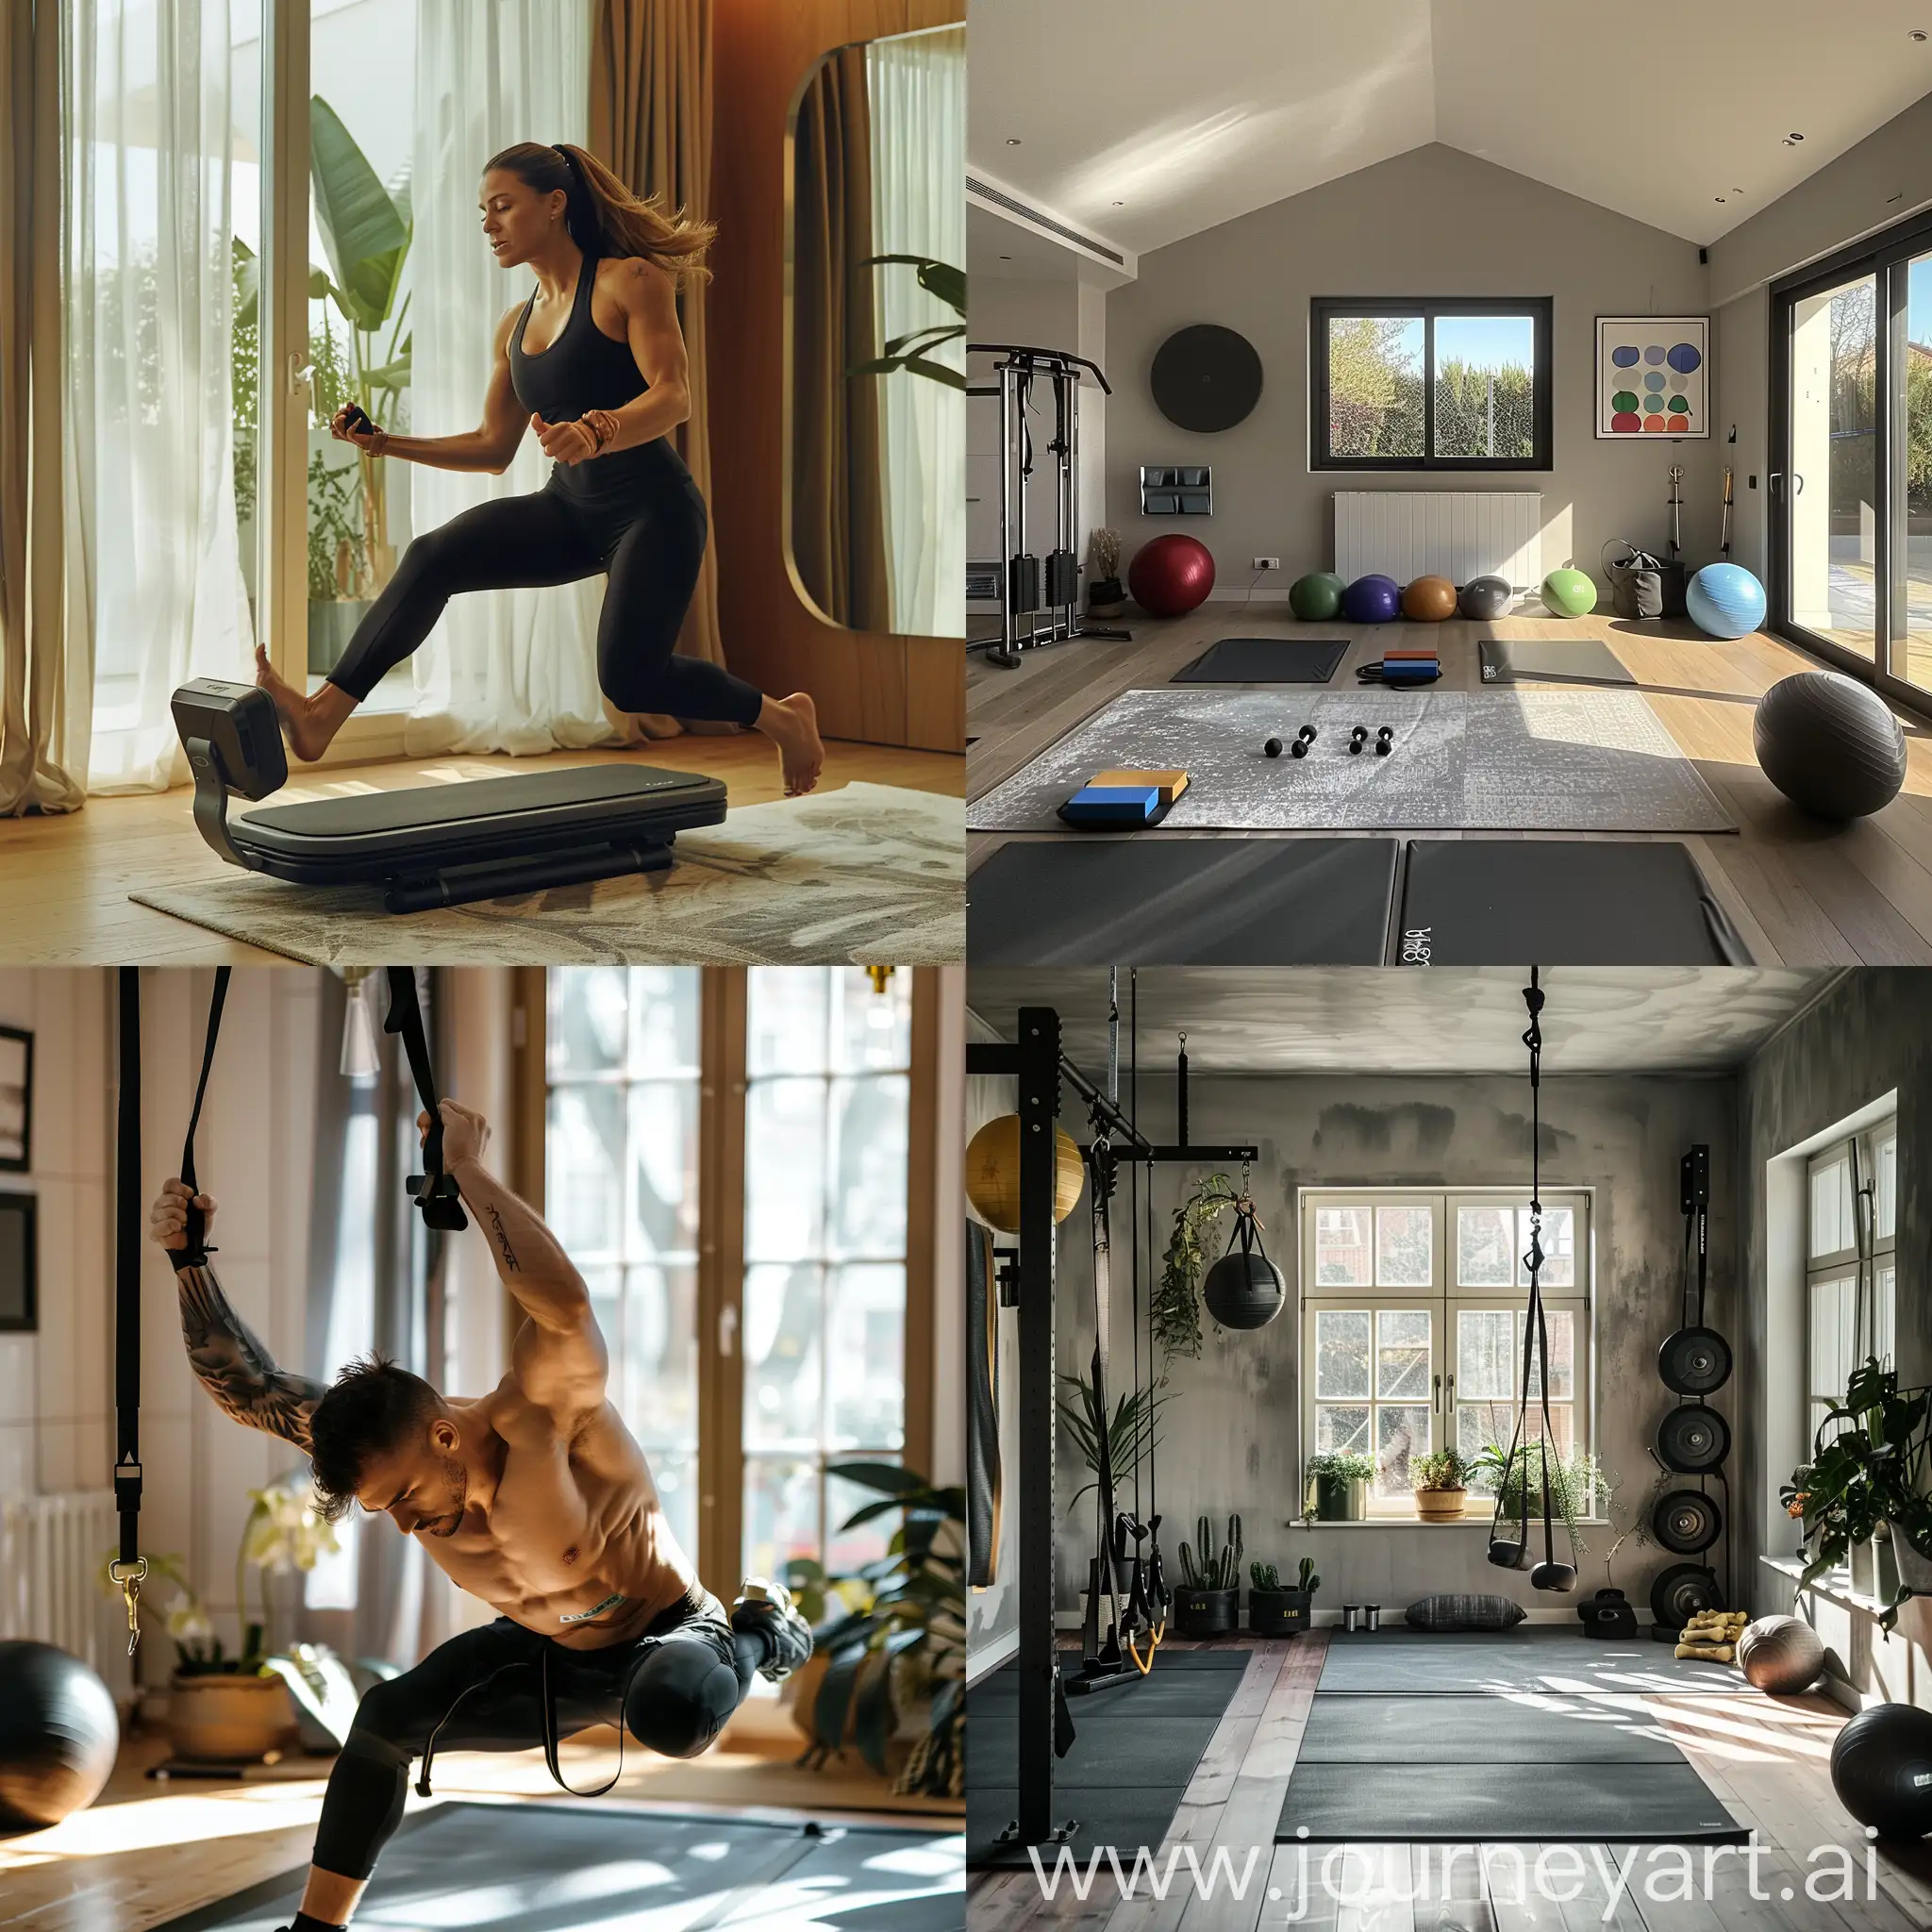 Exercise course at home